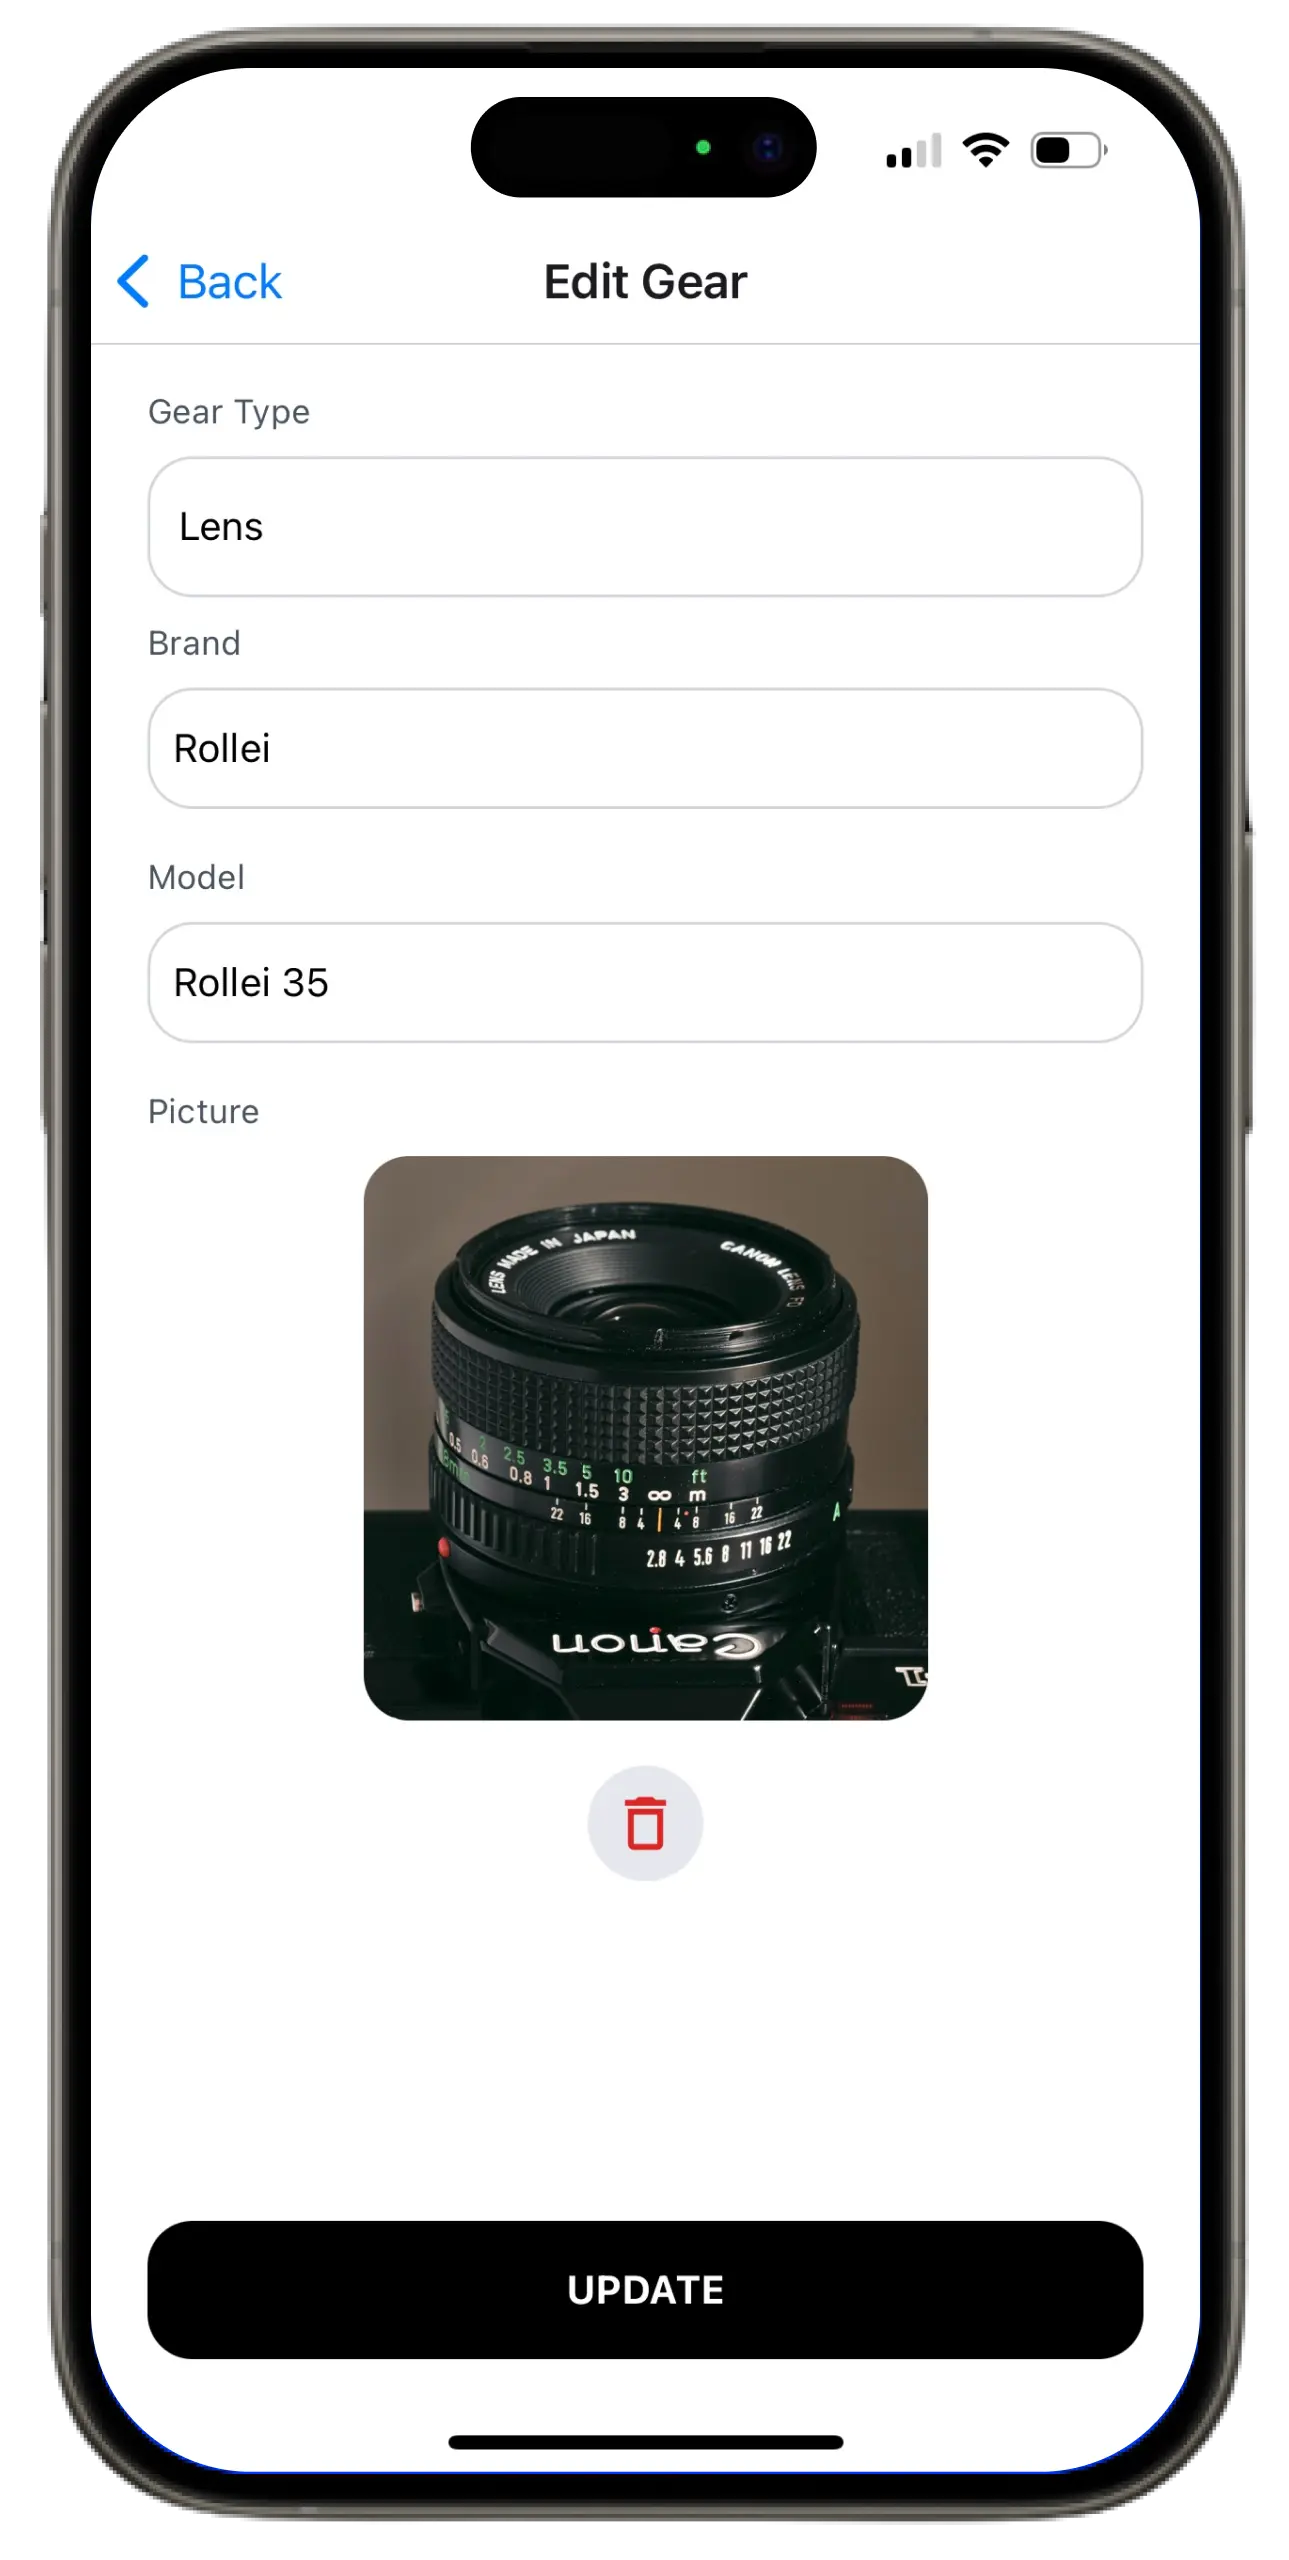 Screenshot of the gear list in the app.